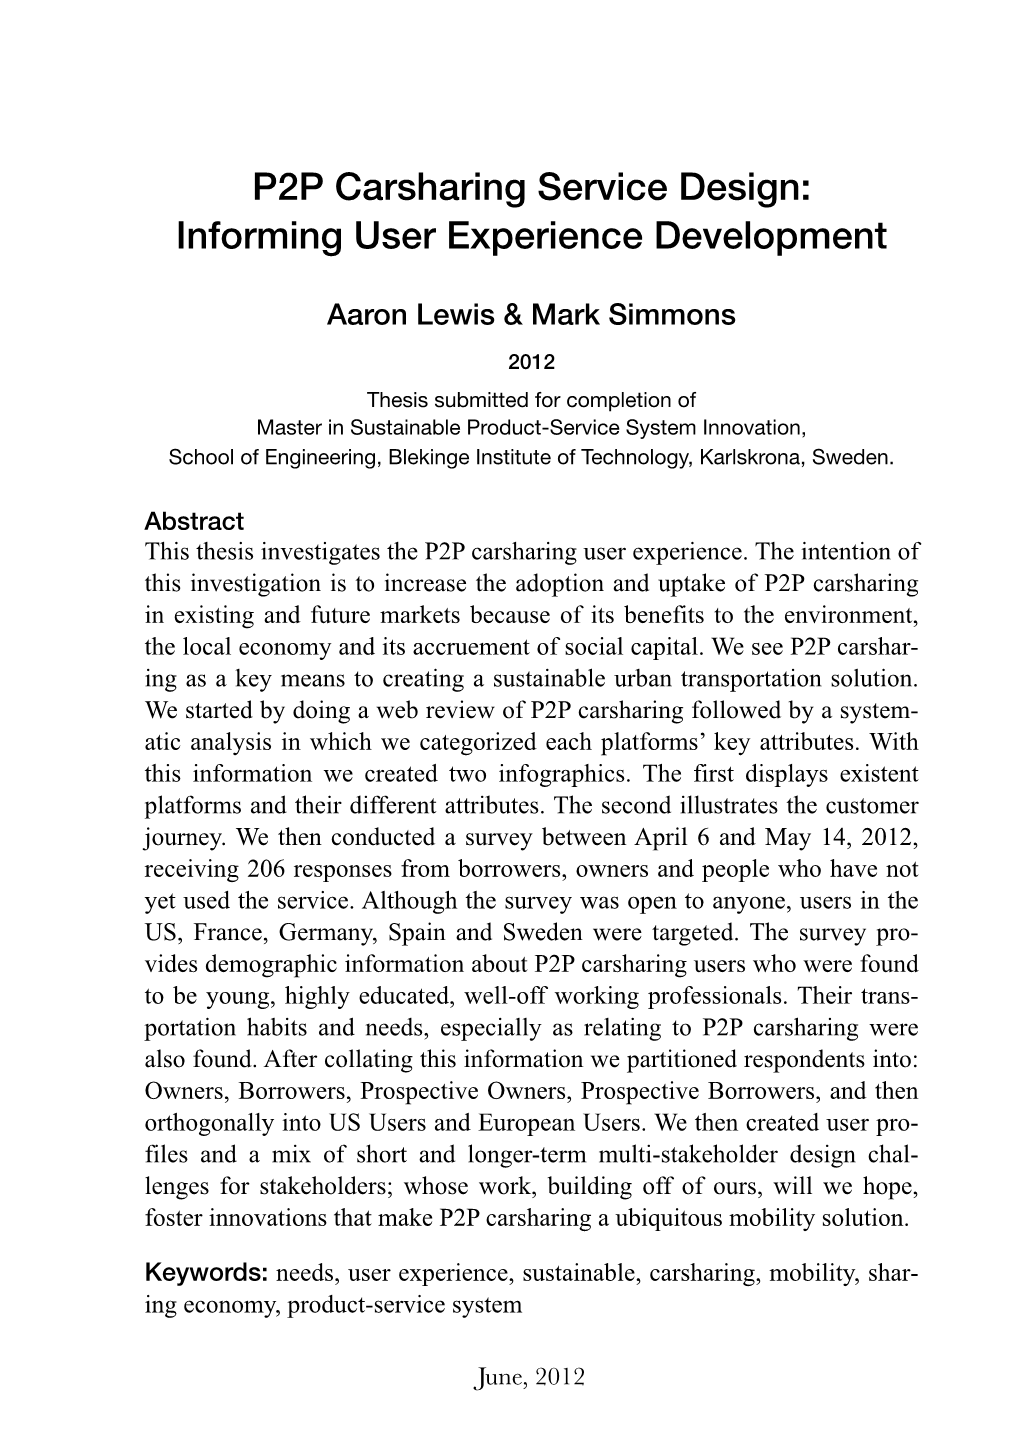 P2P Carsharing Service Design: Informing User Experience Development